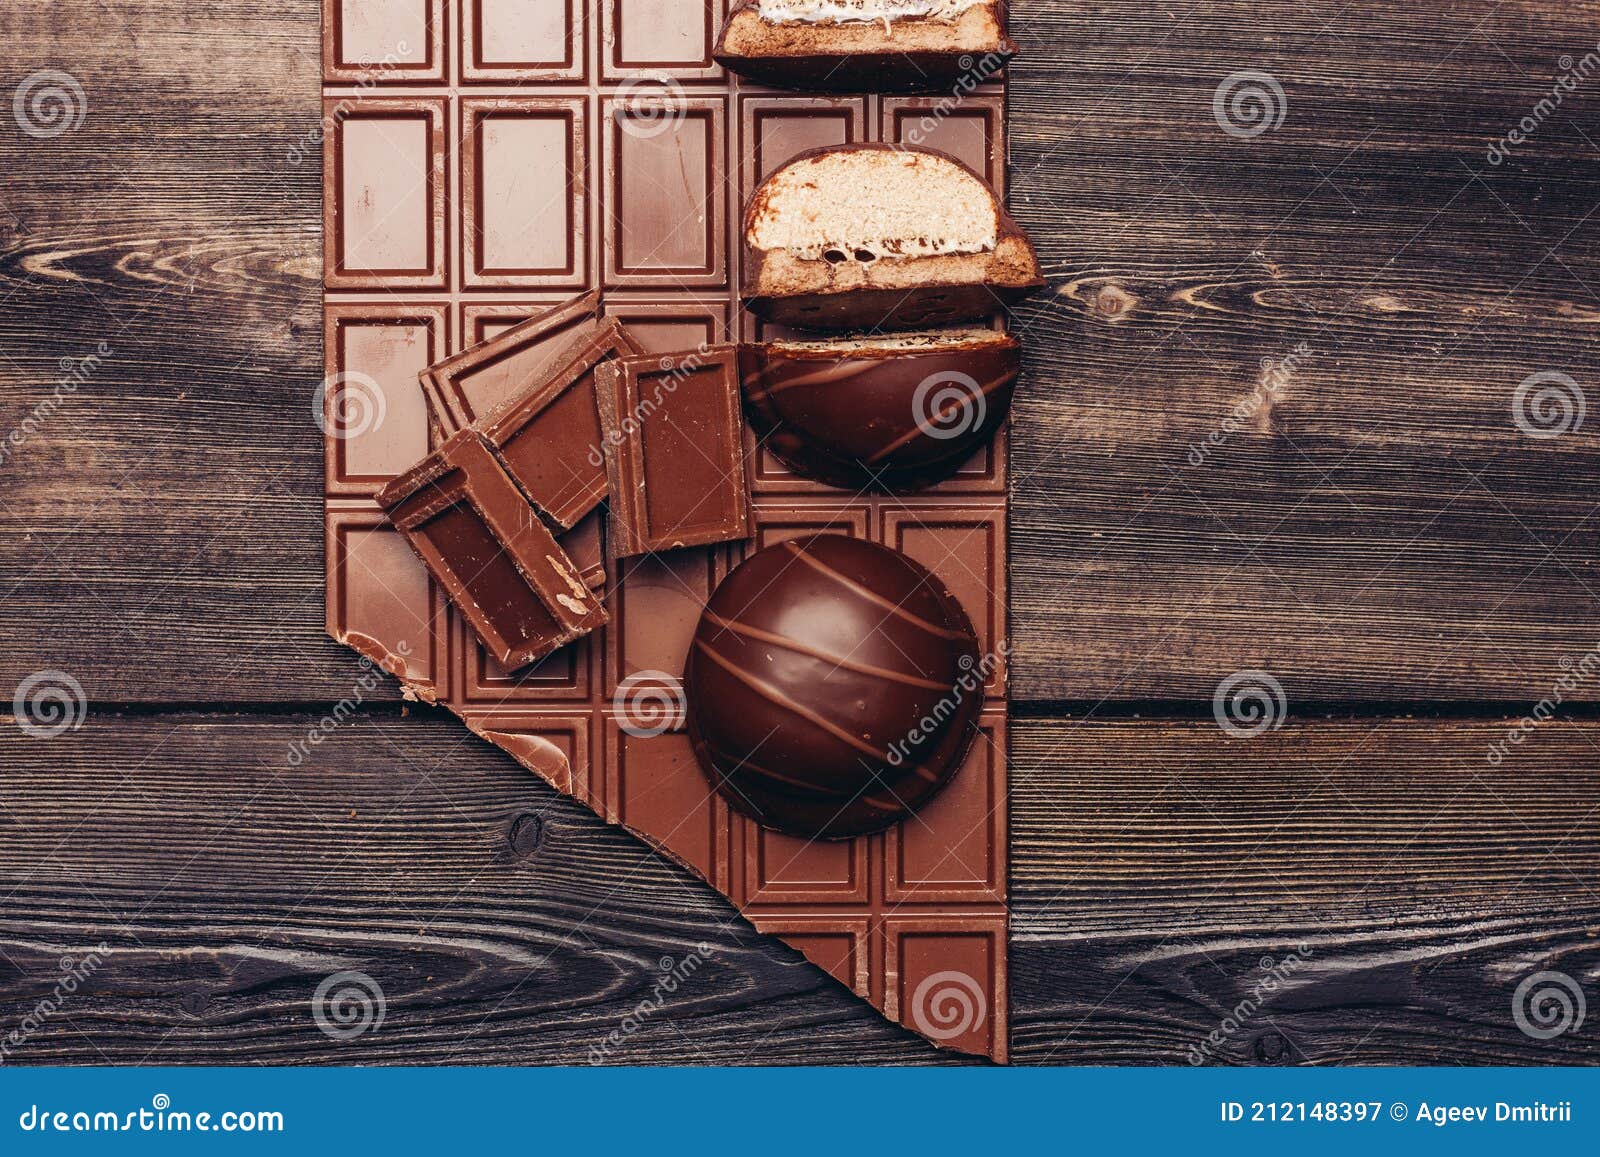 chocolate bar delicacy sweets cocoa gastronomia wooden background